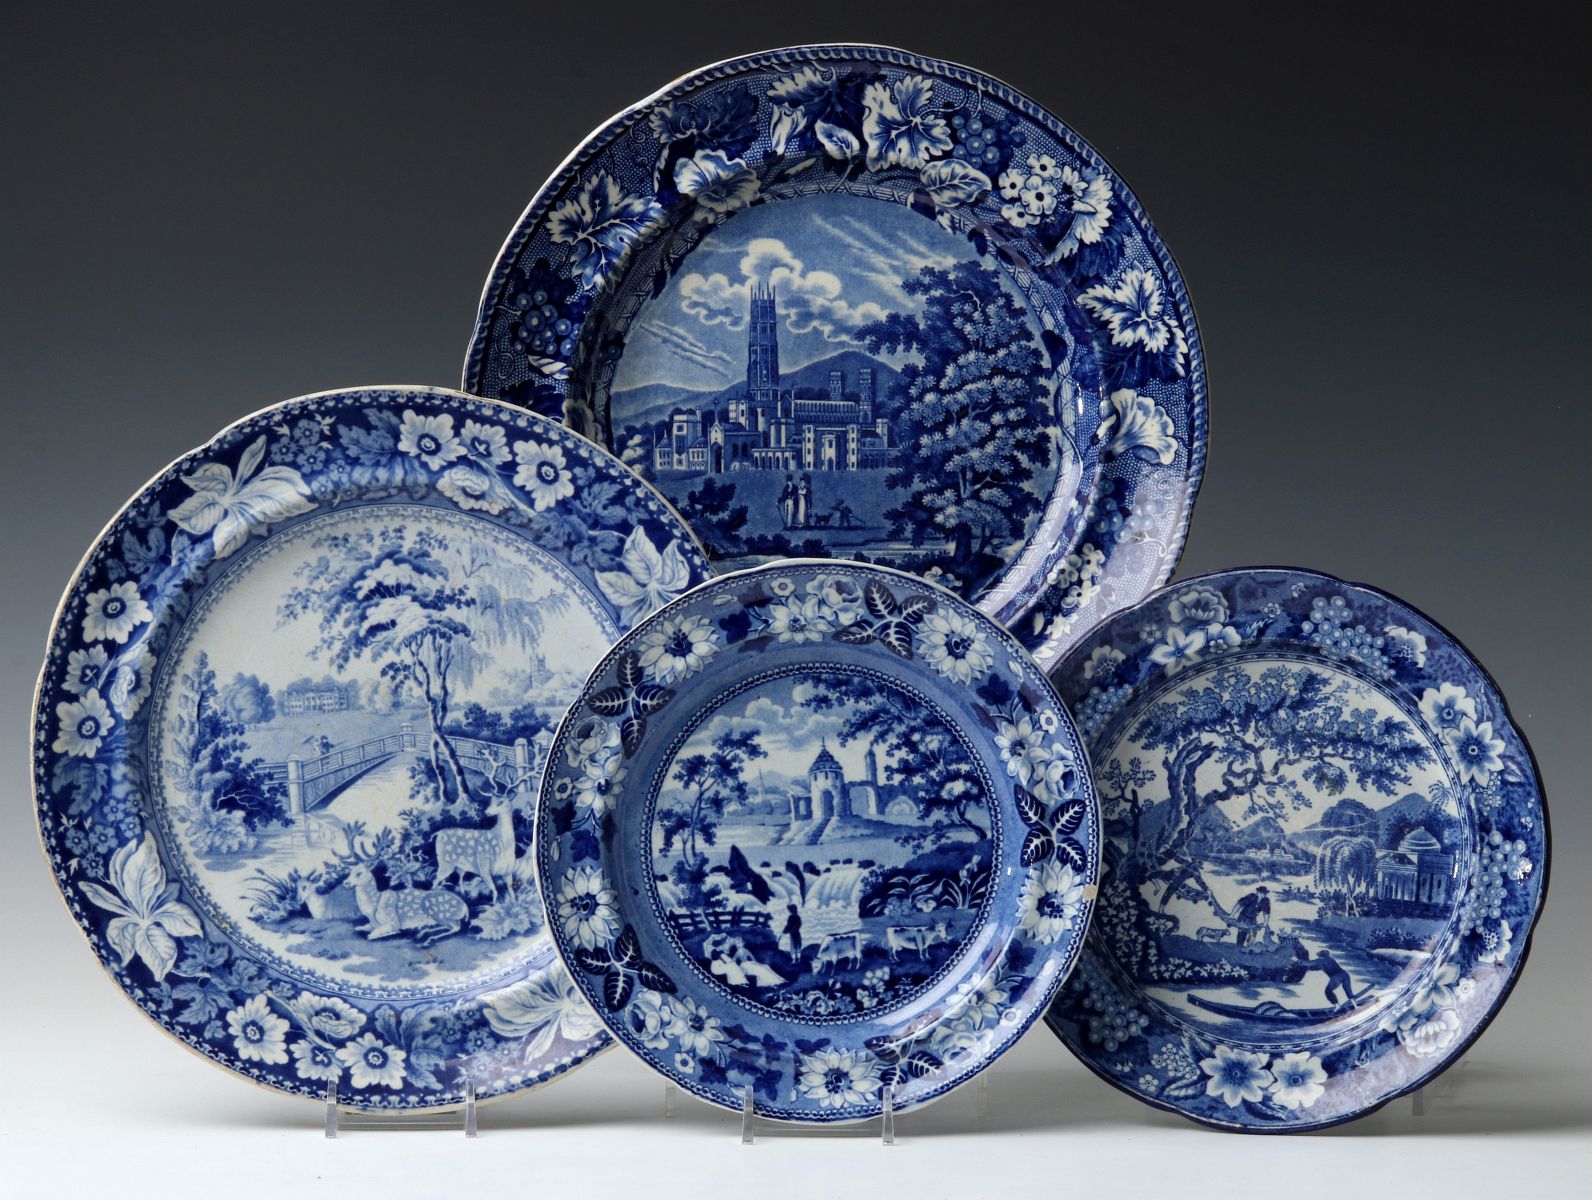 HISTORICAL STAFFORDSHIRE BLUE AND WHITE PLATES